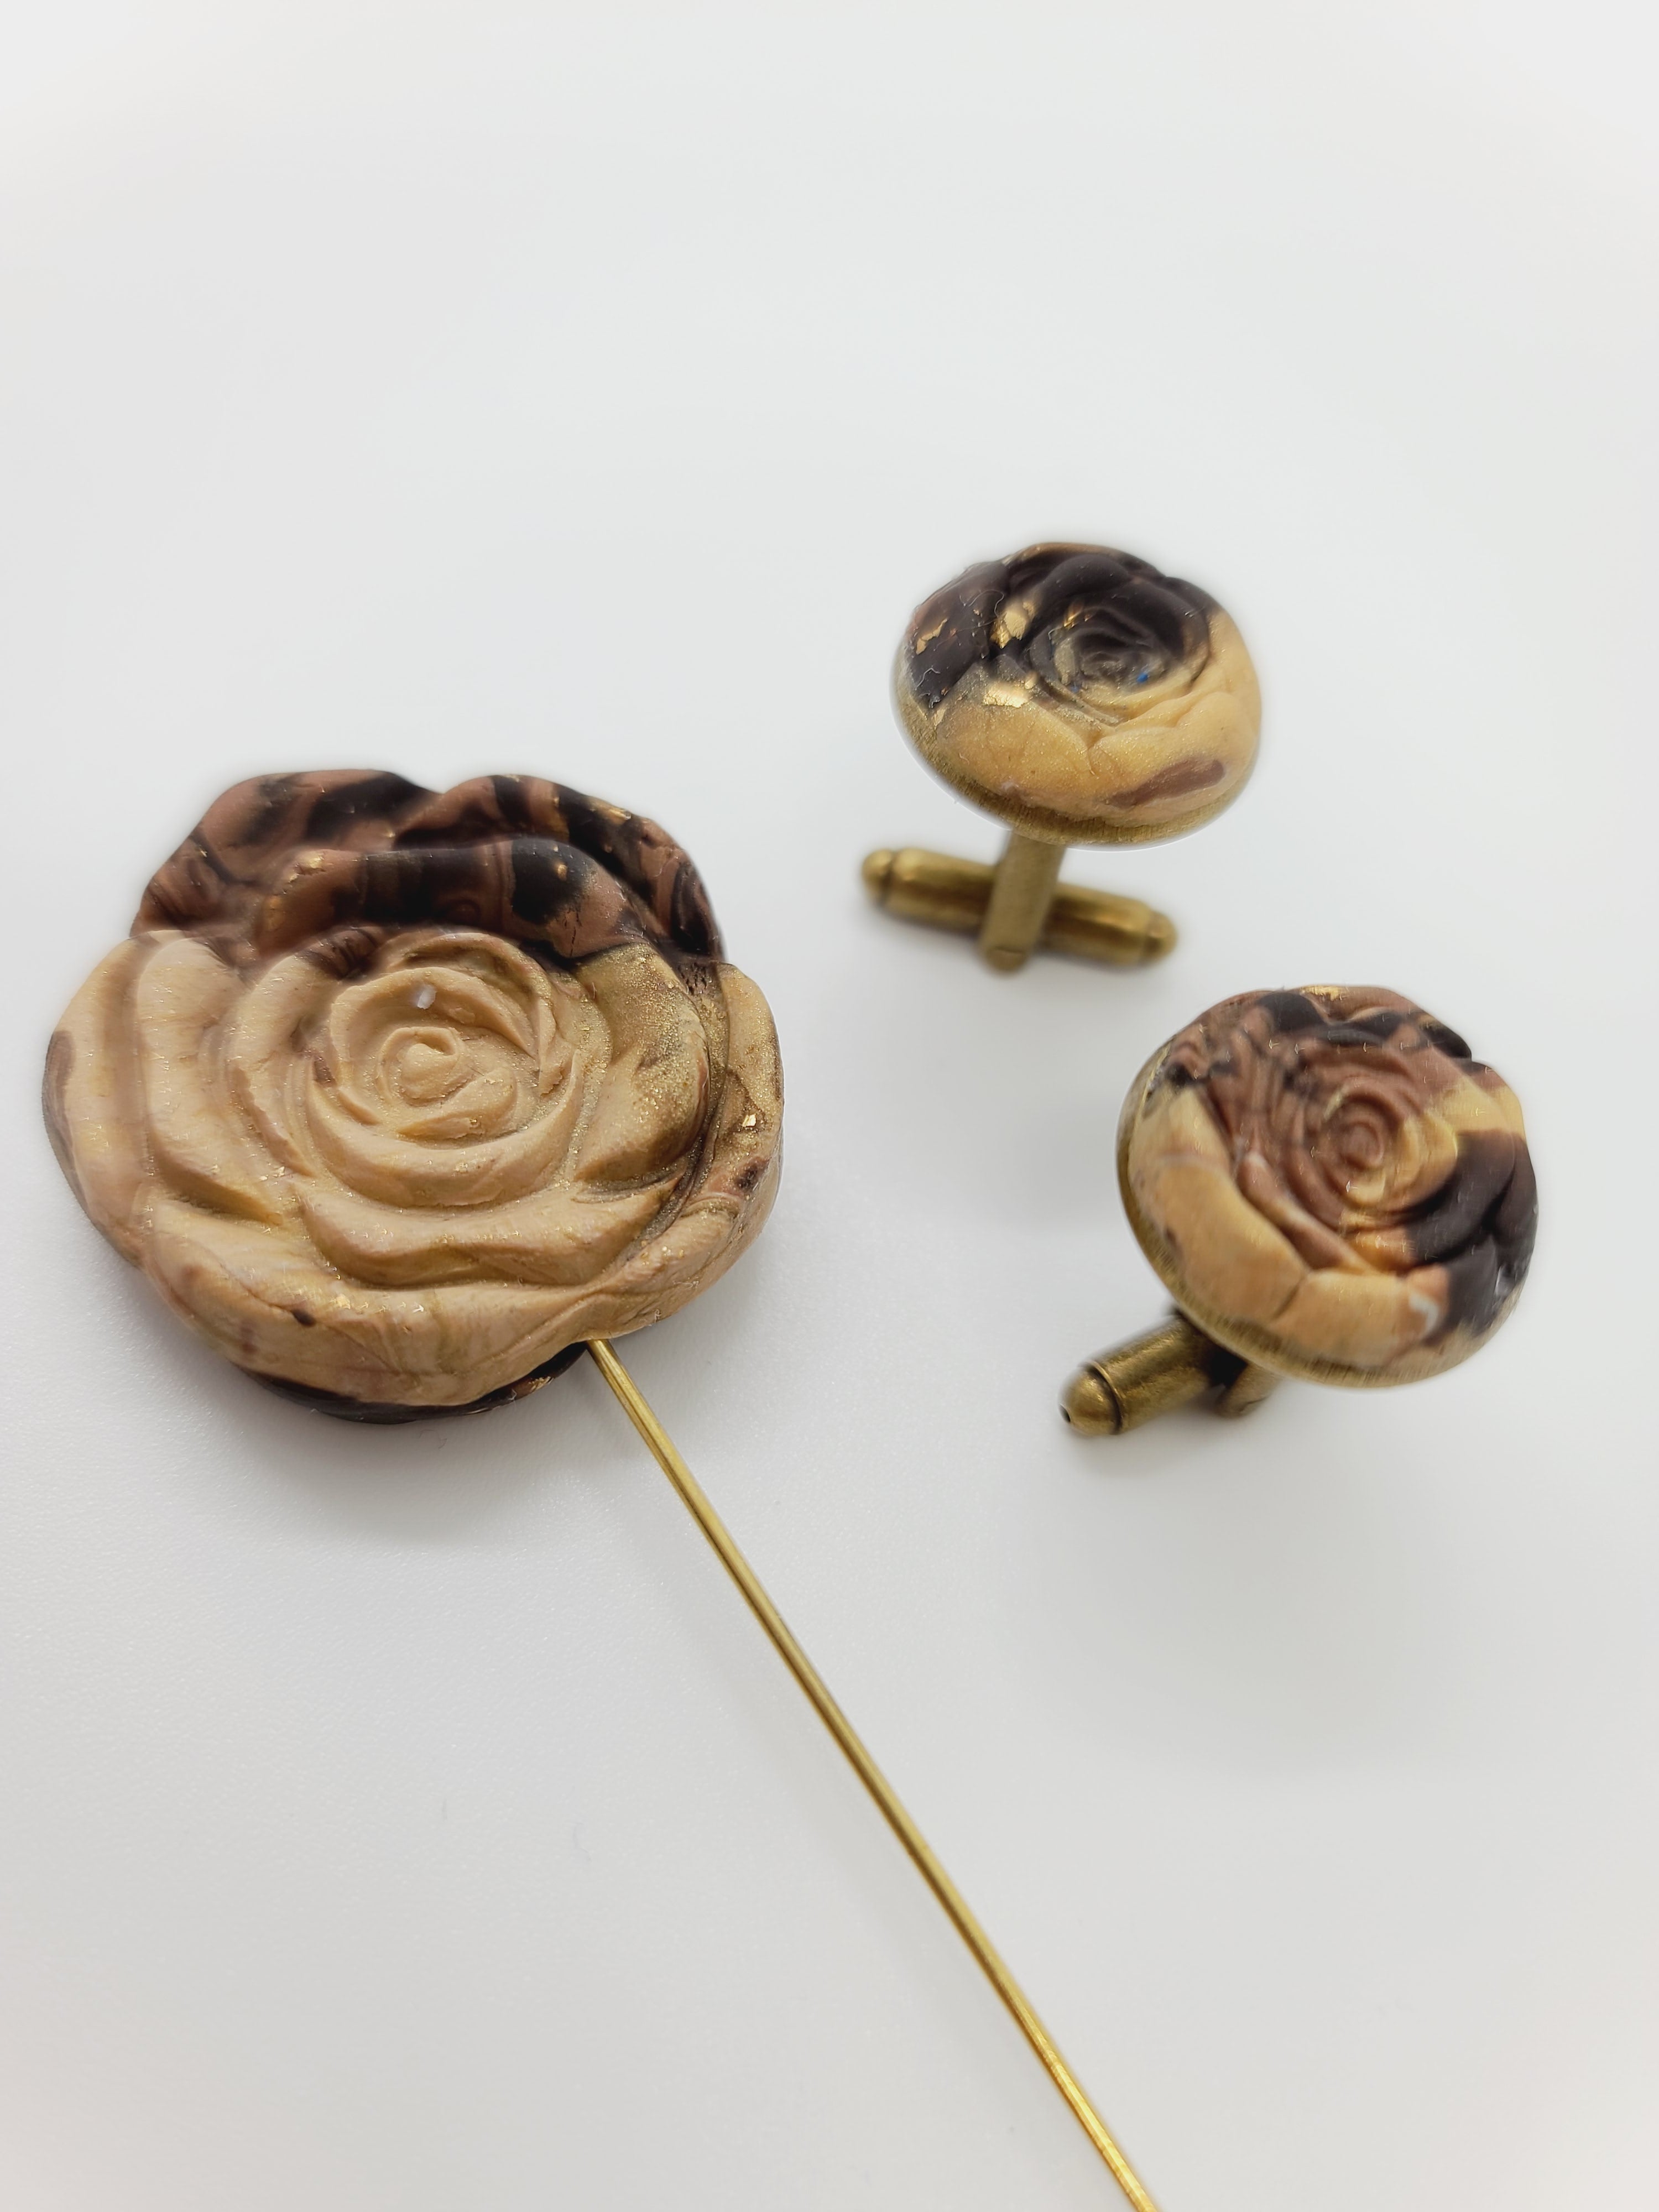 Distinctly You! These were part of our summer Pop Up Shop line and are now available here on our website. Handmade cufflinks and lapel pin using brown polymer clay with gold flake, brass lapel pin, and brass cufflinks.